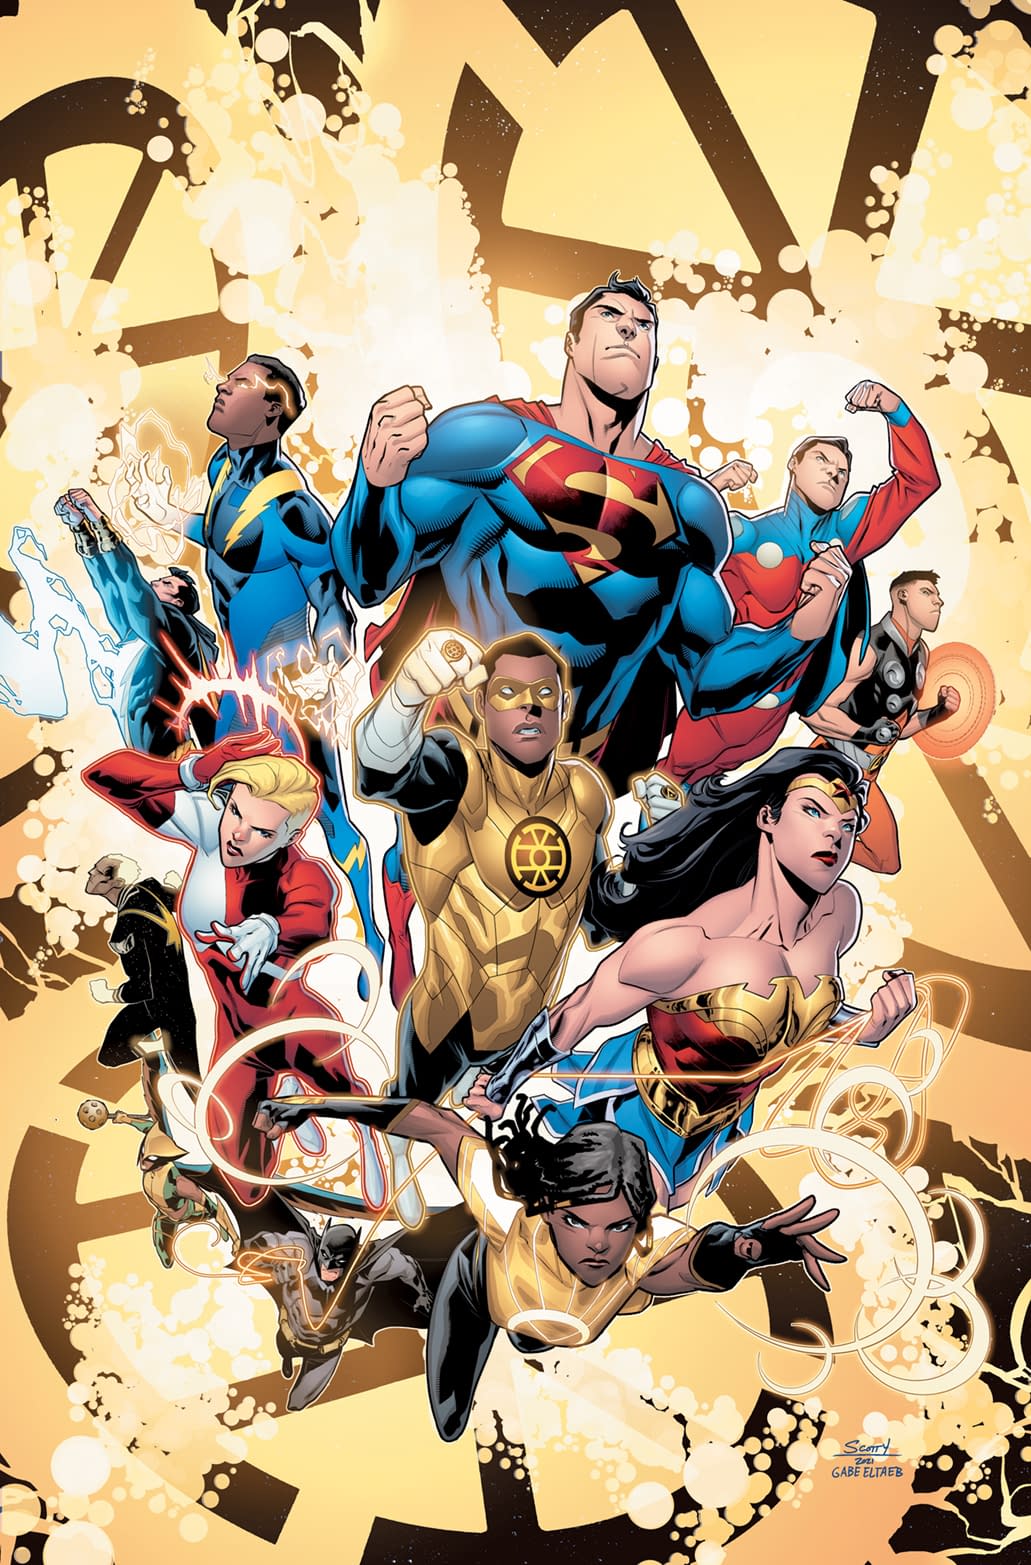 Justice League vs The Legion of Super-Heroes #1 Review | The Aspiring Kryptonian